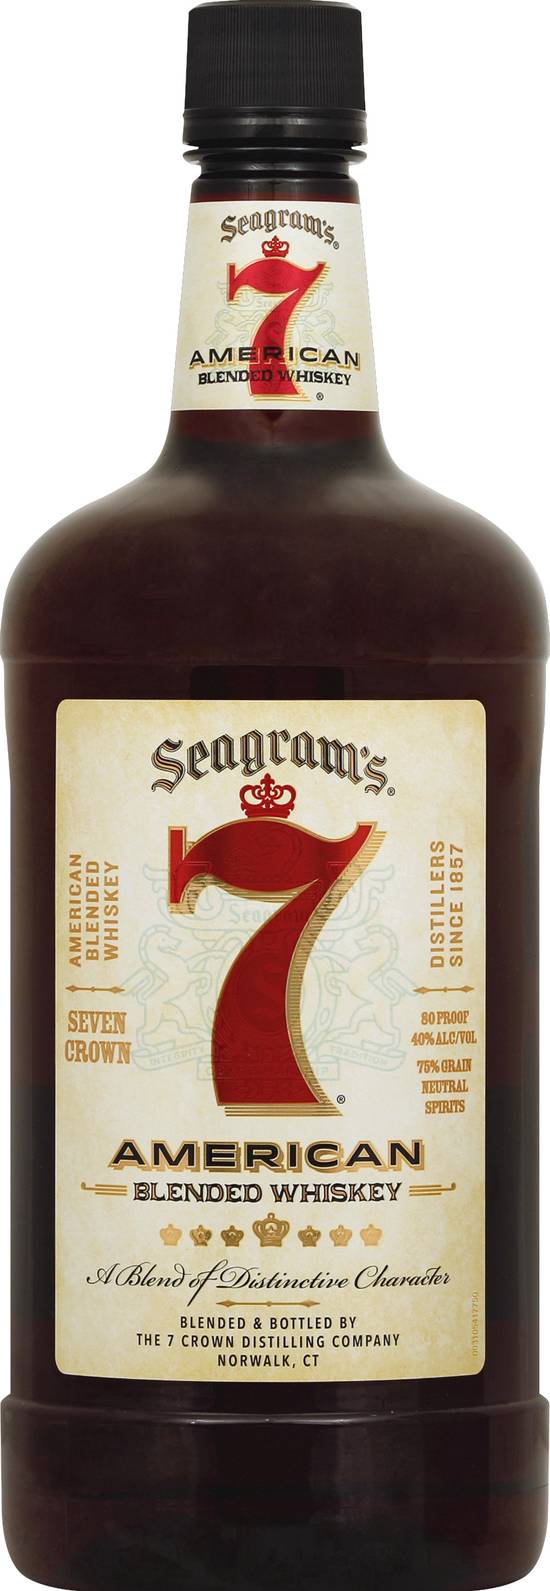 Seagram's Escapes Seven Crown American Blended Whiskey (1.75 L)